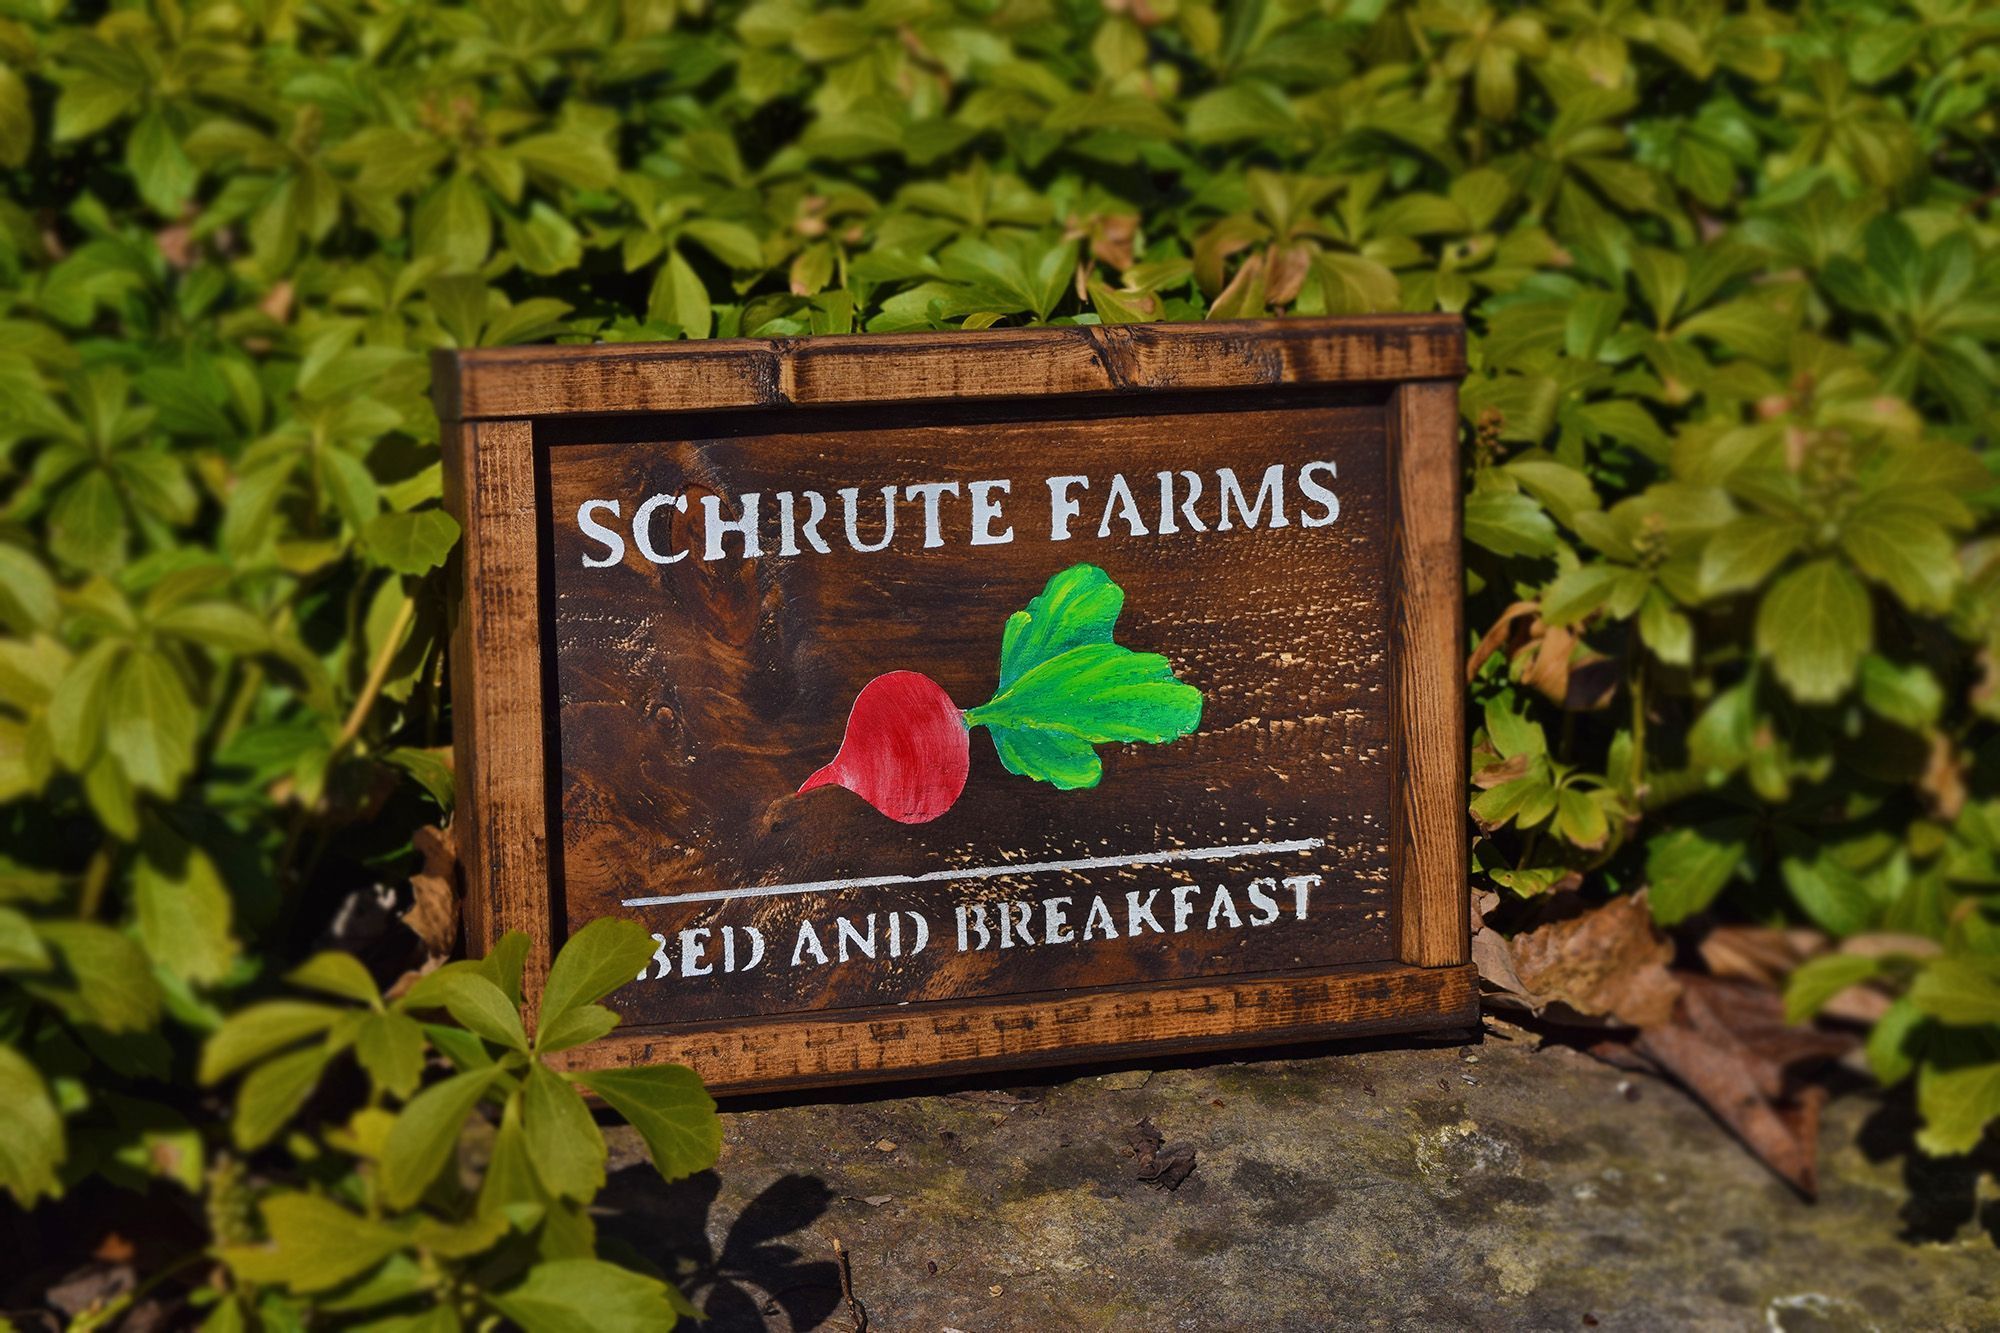 Wood Schrute Farms Sign Wooden Dwight Farm Signs Gift The Office TV Show Holiday Christmas Gift for Her Him Best Friend. Schrute farms, Farm signs, Office tv show